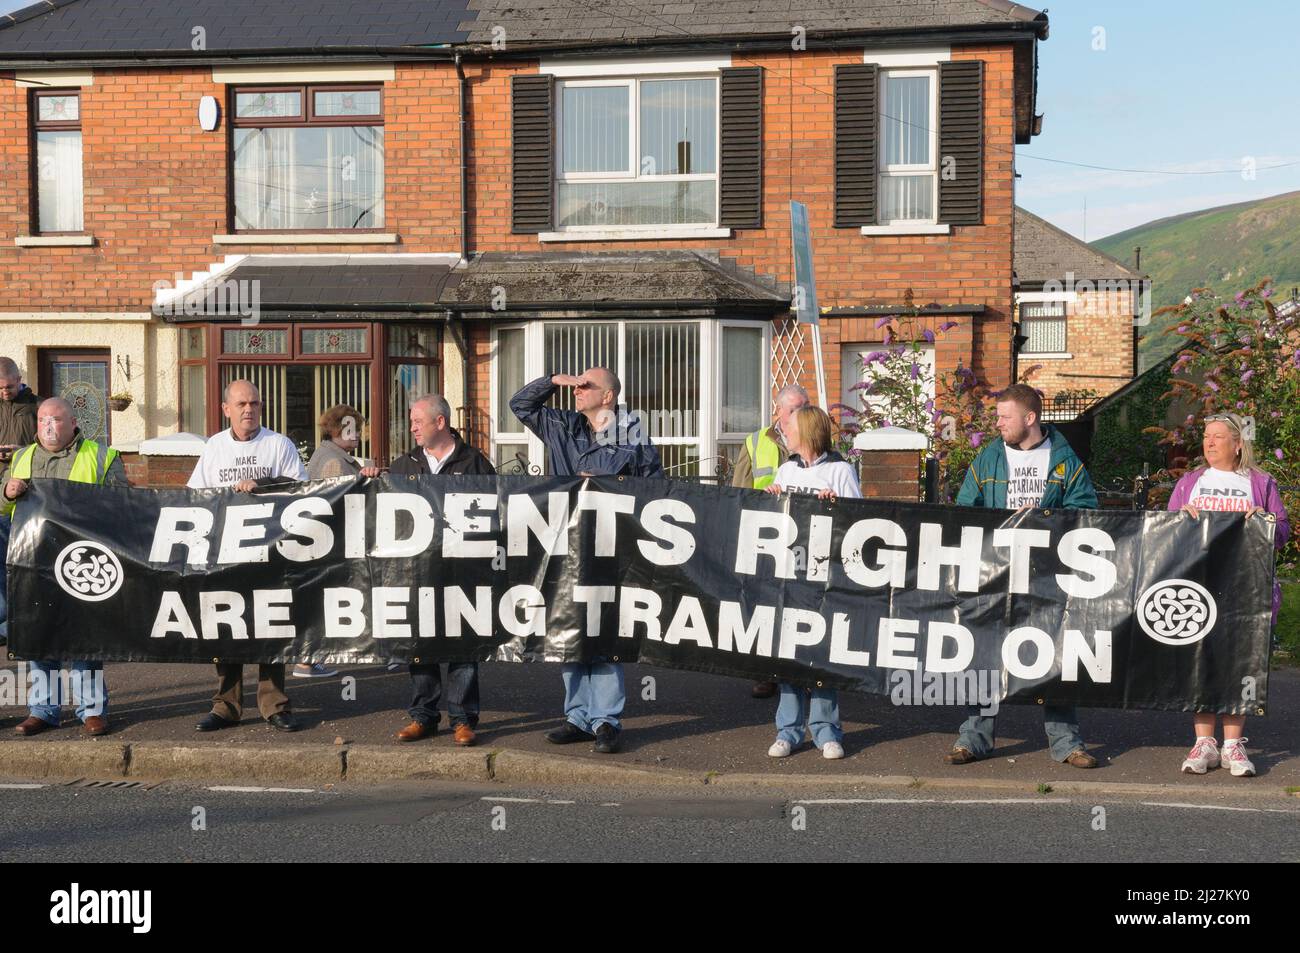 14/08/2010, Crumlin Road, Belfast, Northern Ireland. Ardoyne residents hold a protest banner saying 'Residents Rights are being trampled on' Stock Photo